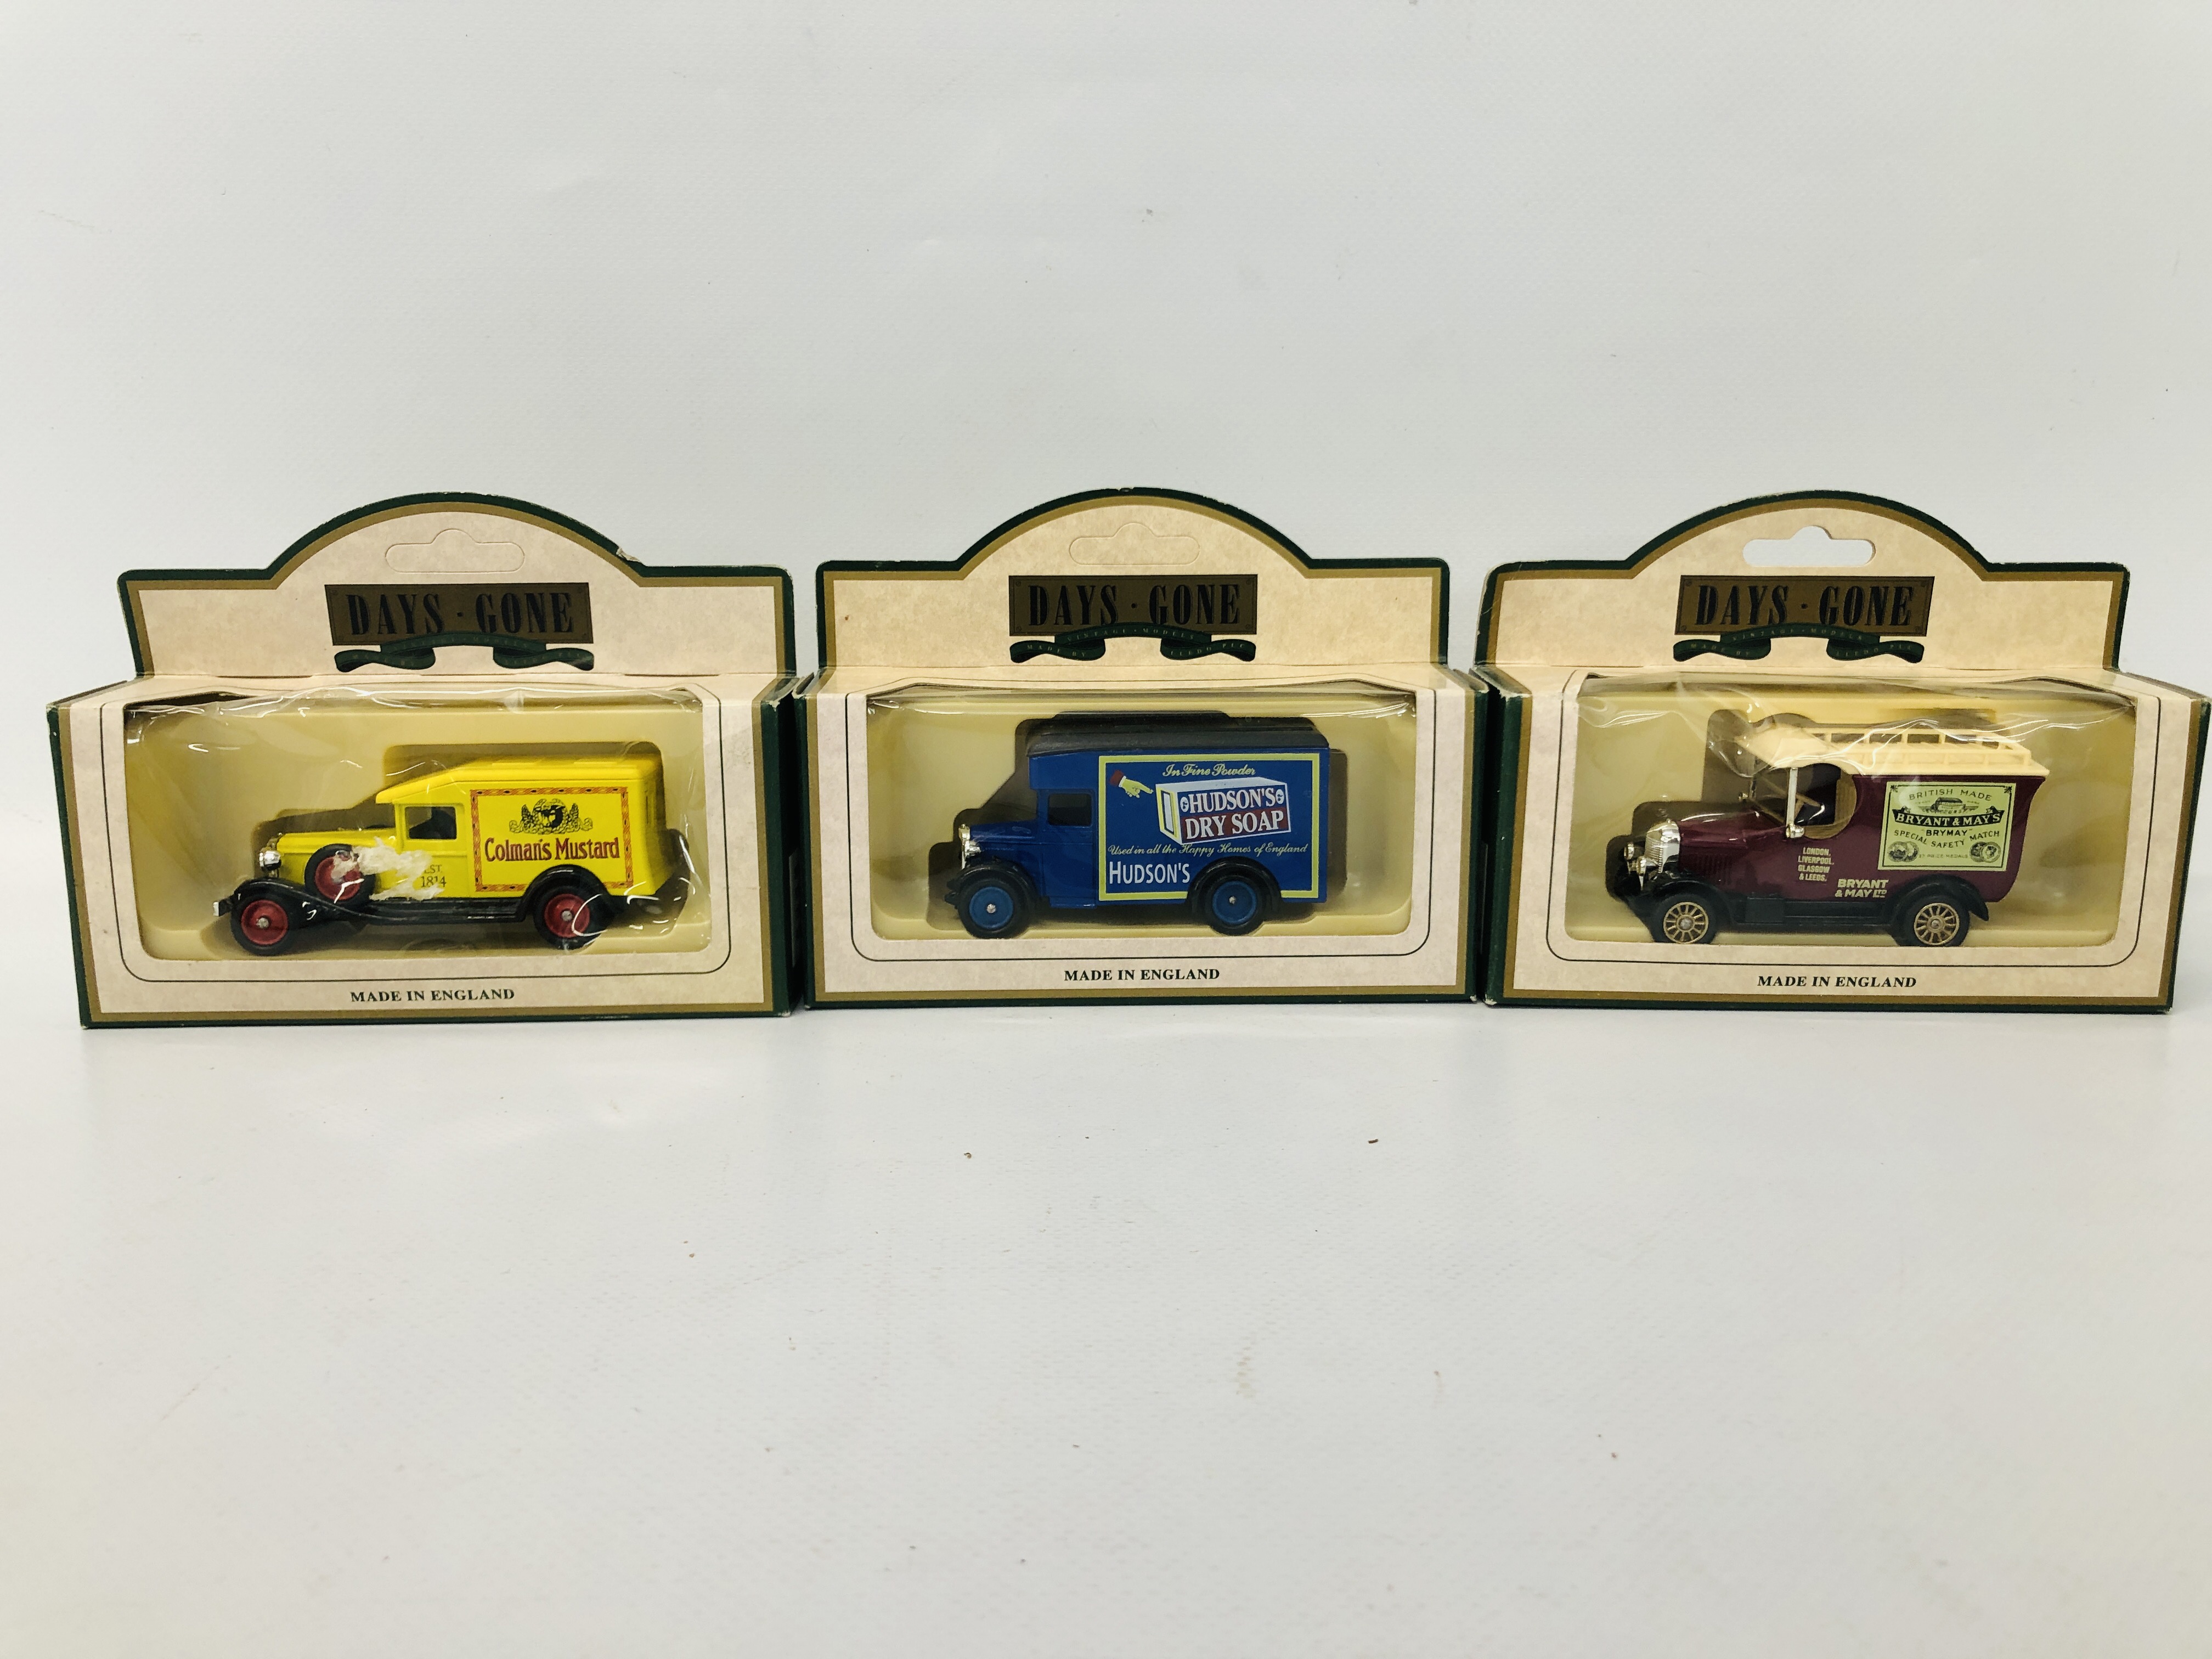 COLLECTION OF DAYS GONE COLLECTORS DIE-CAST MODEL VEHICLES IN ORIGINAL BOXES - Image 2 of 10